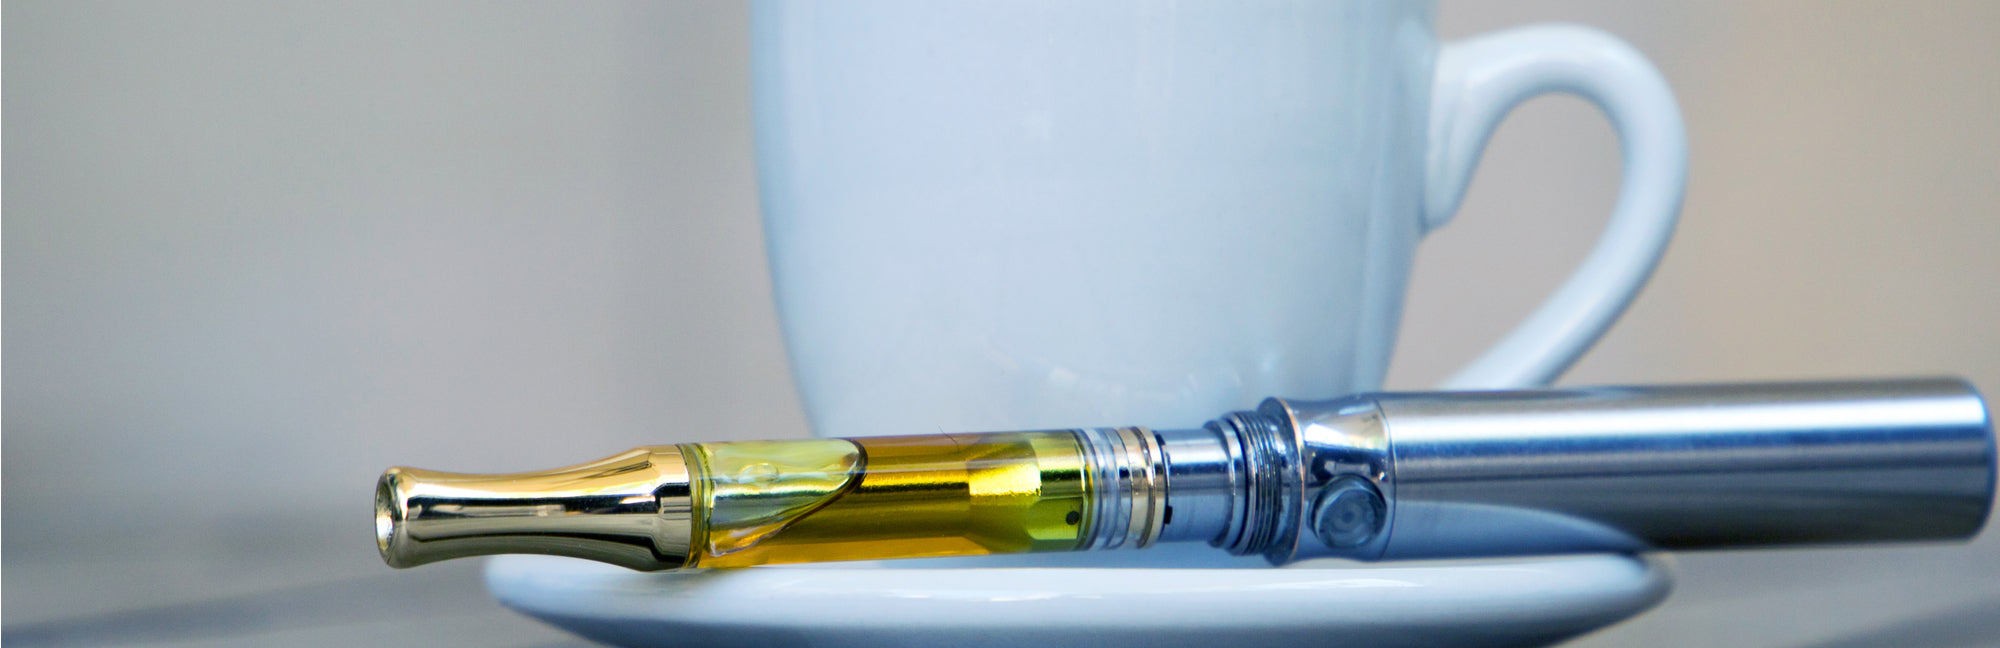 How To: Dabbing Concentrate With a Vape Wax Pen - Learn Here - HEMPER